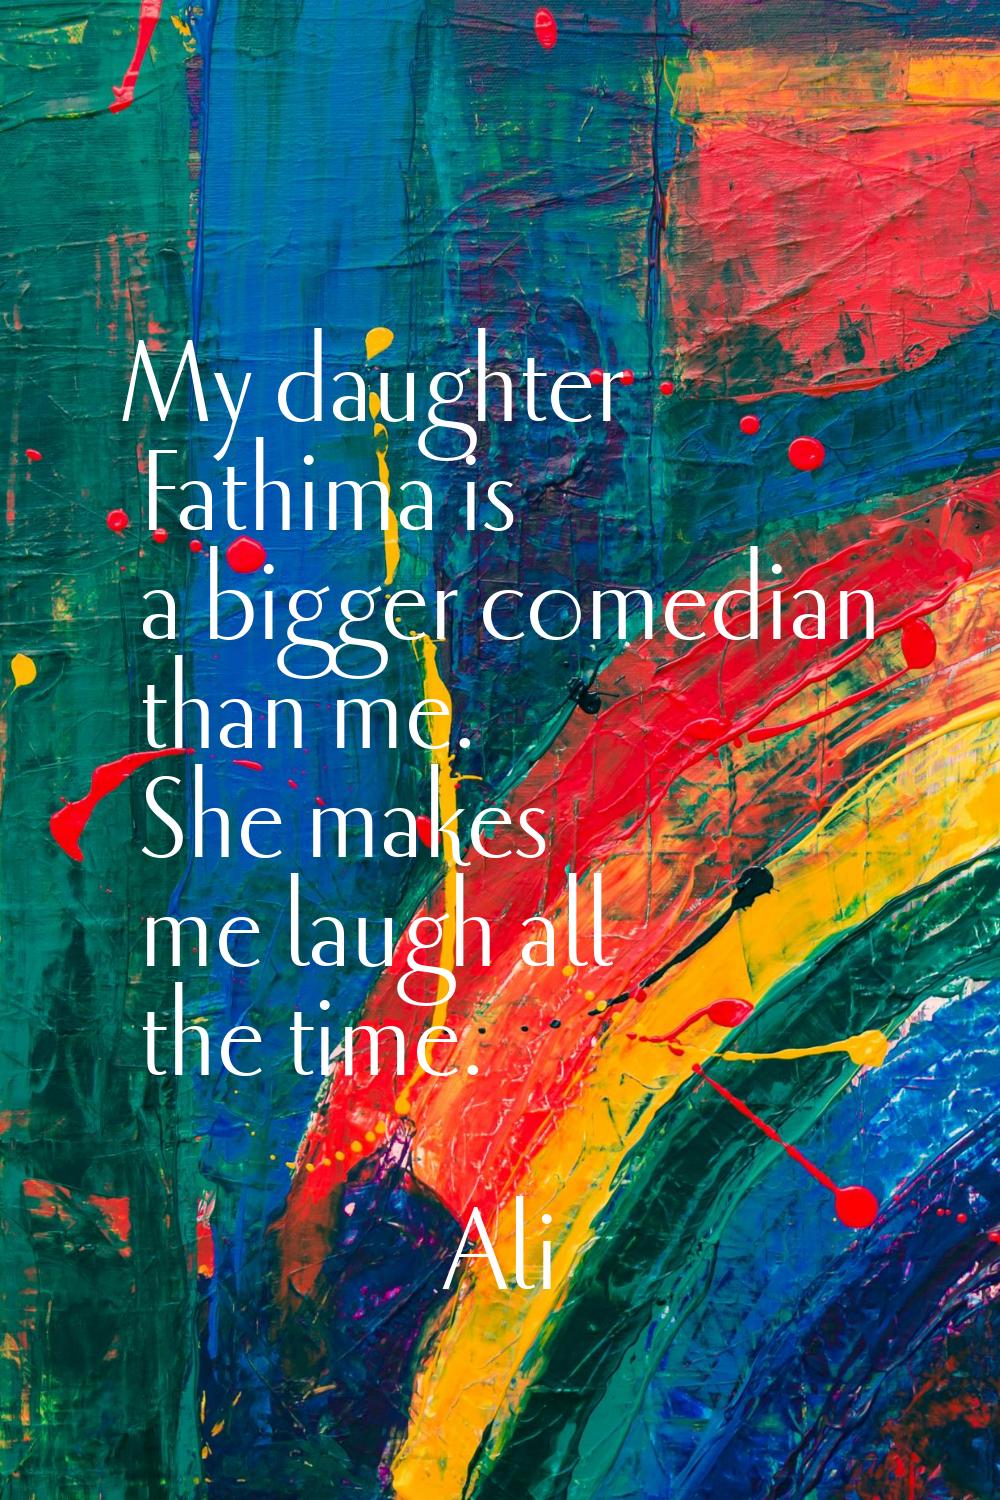 My daughter Fathima is a bigger comedian than me. She makes me laugh all the time.